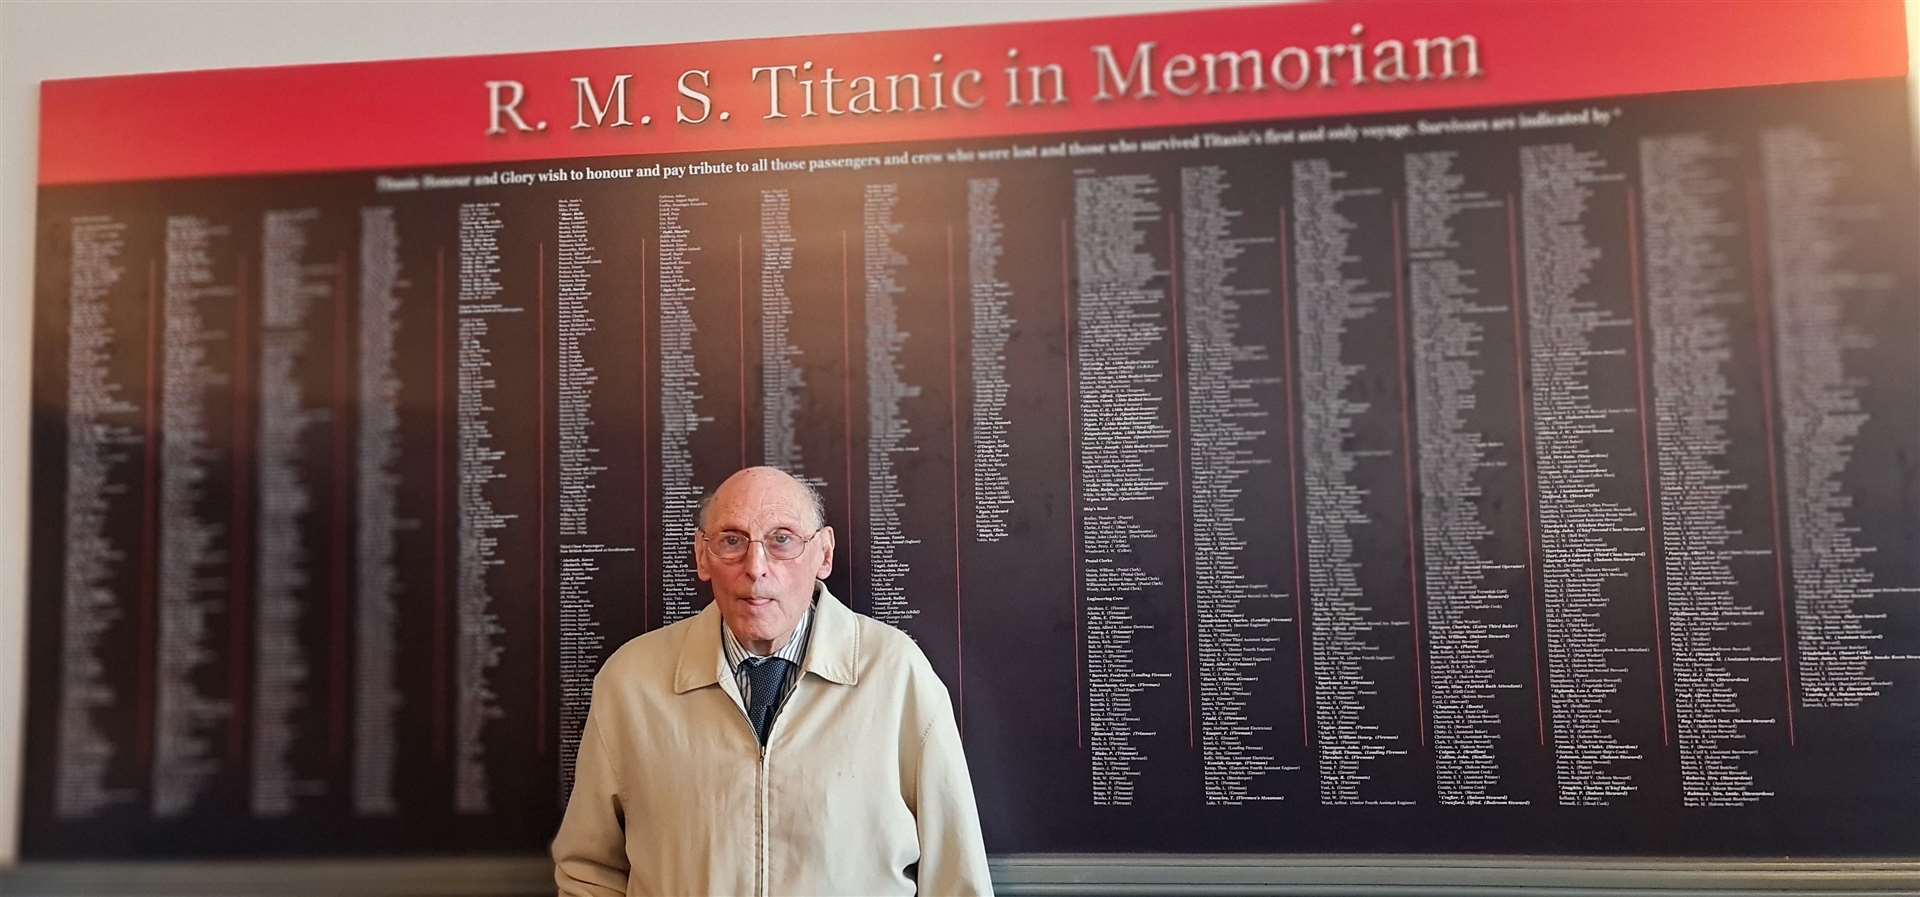 Herne Bay pensioner Sidney Hearne pictured next to the exhibition's in-memoriam board